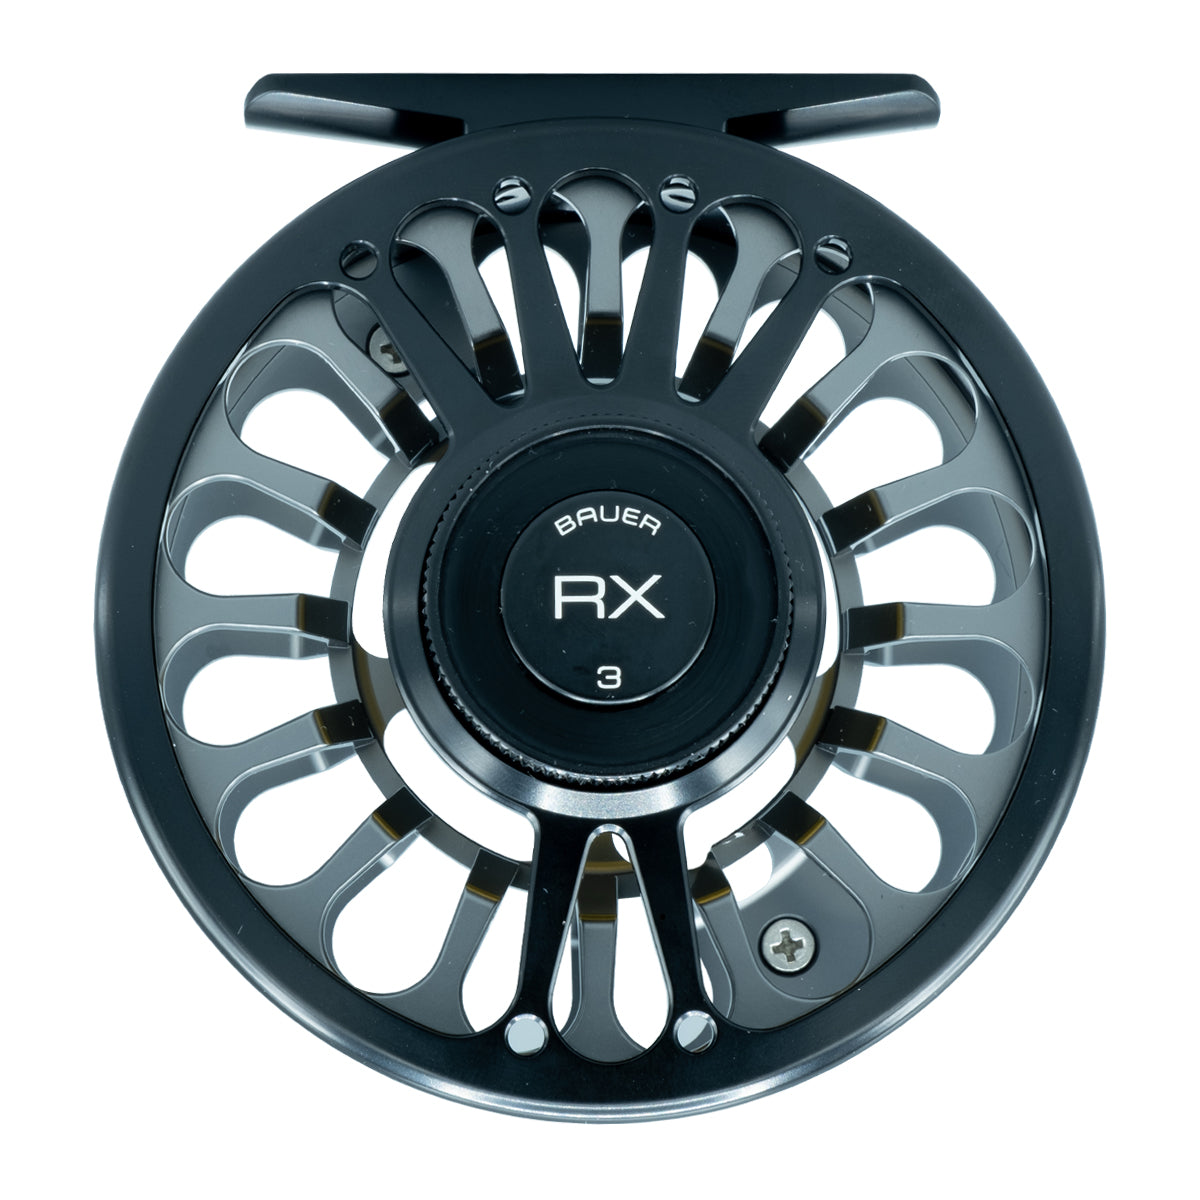 Bauer RX 3 Fly Reel Charcoal